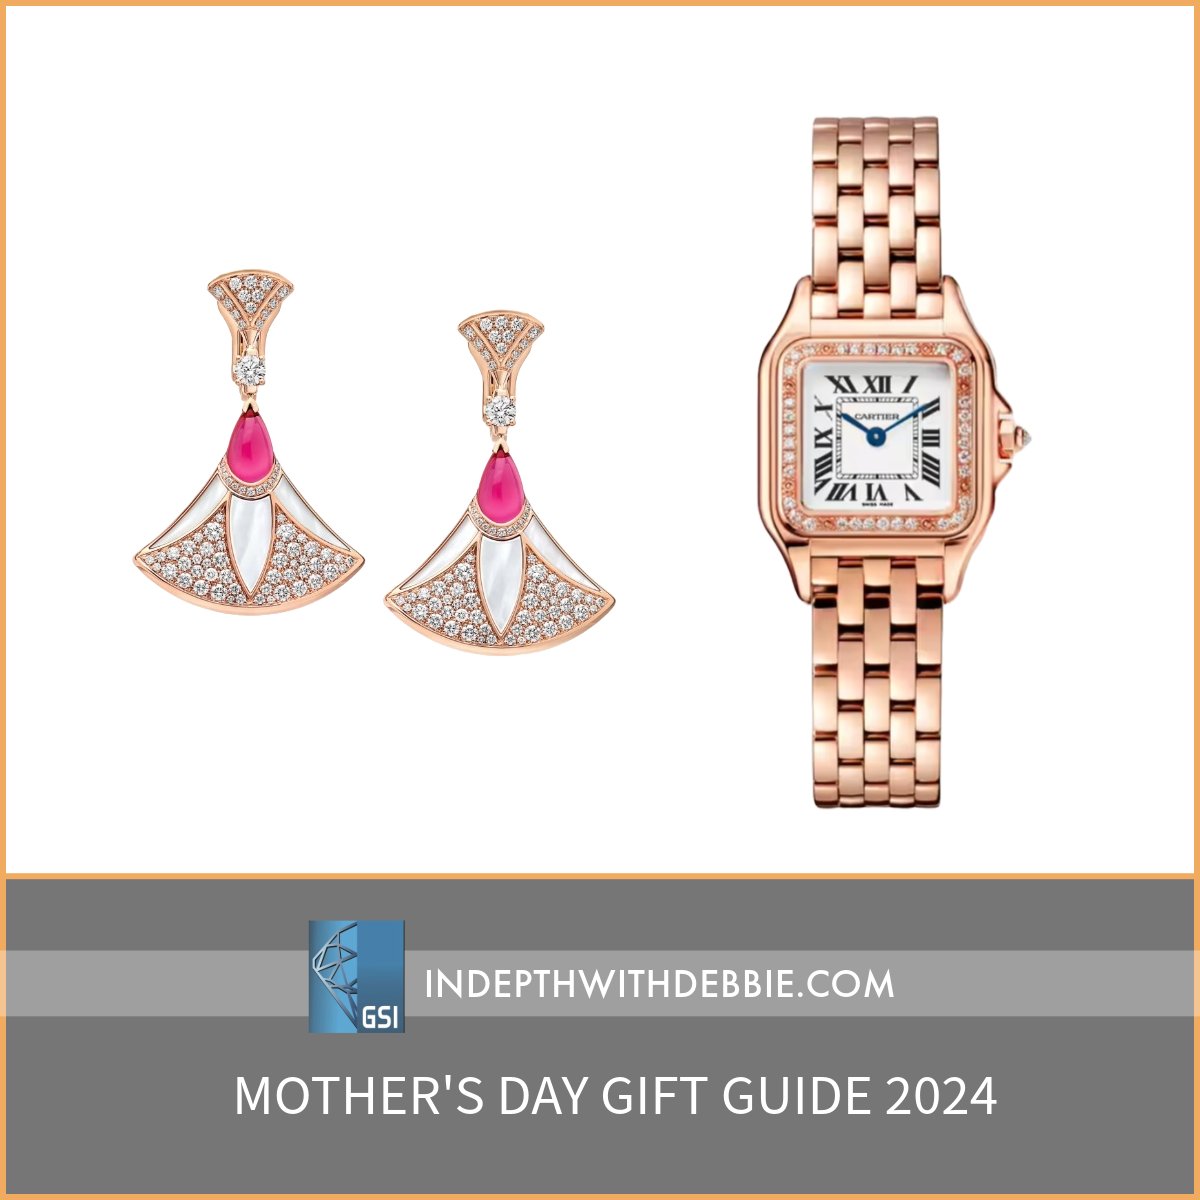 As lovely as flowers are, Mother’s Day jewelry gifts are unequivocally longer lasting. 

Read 'Mother's Day Gift Guide 2024” on InDepthWithDebbie.com at bit.ly/3UFLu2Z

#DiamondIndustry #DebbieAzar #InDepthWithDebbie #JewelryStyle #Mother'sDay #MothersDayGiftGuide